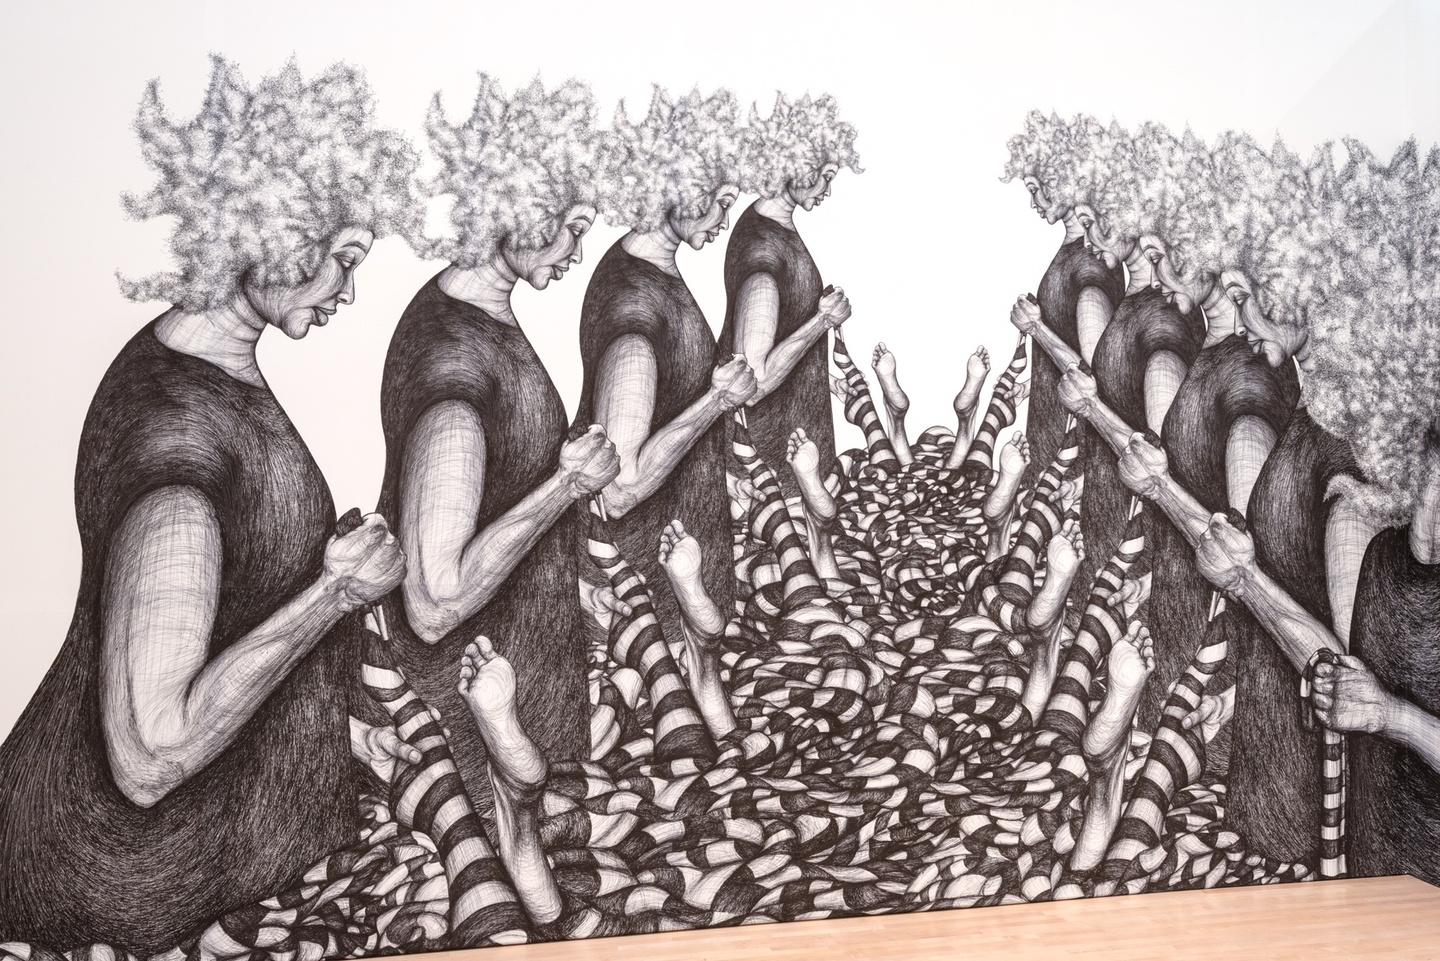 Larger than life ballpoint drawing of 8 figures in dark clothing pulling striped socks off disembodied feet in front of a pile of similar socks